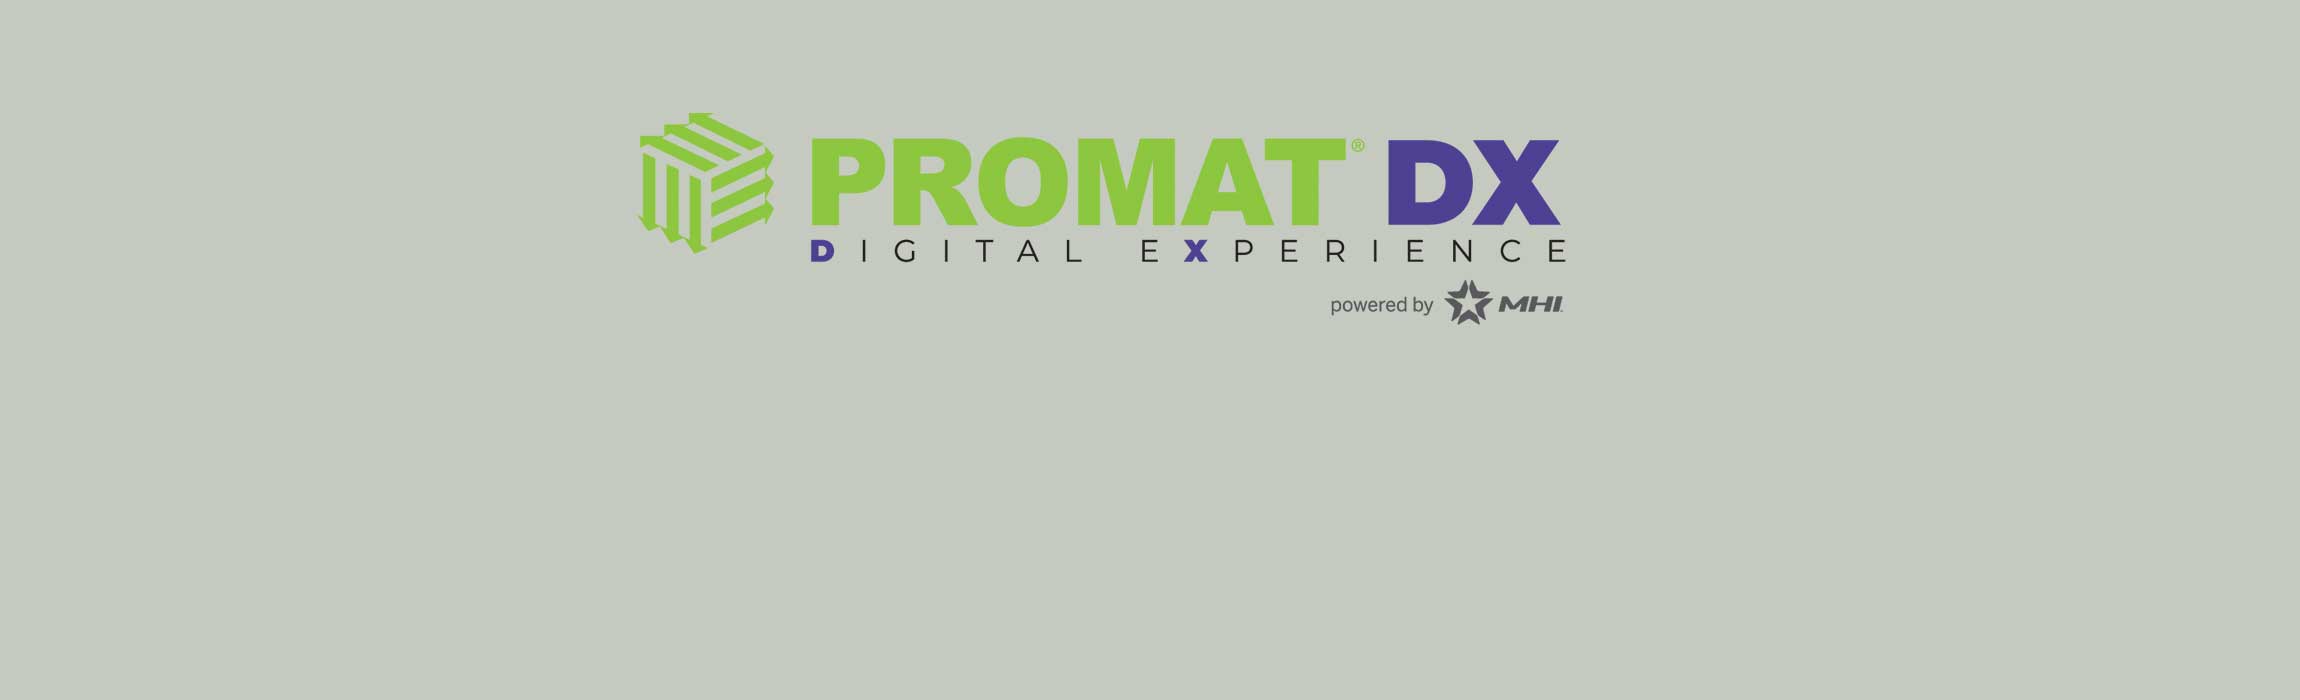 Promat DX digital exhibition about manufacturing and supply chain world | TGW.